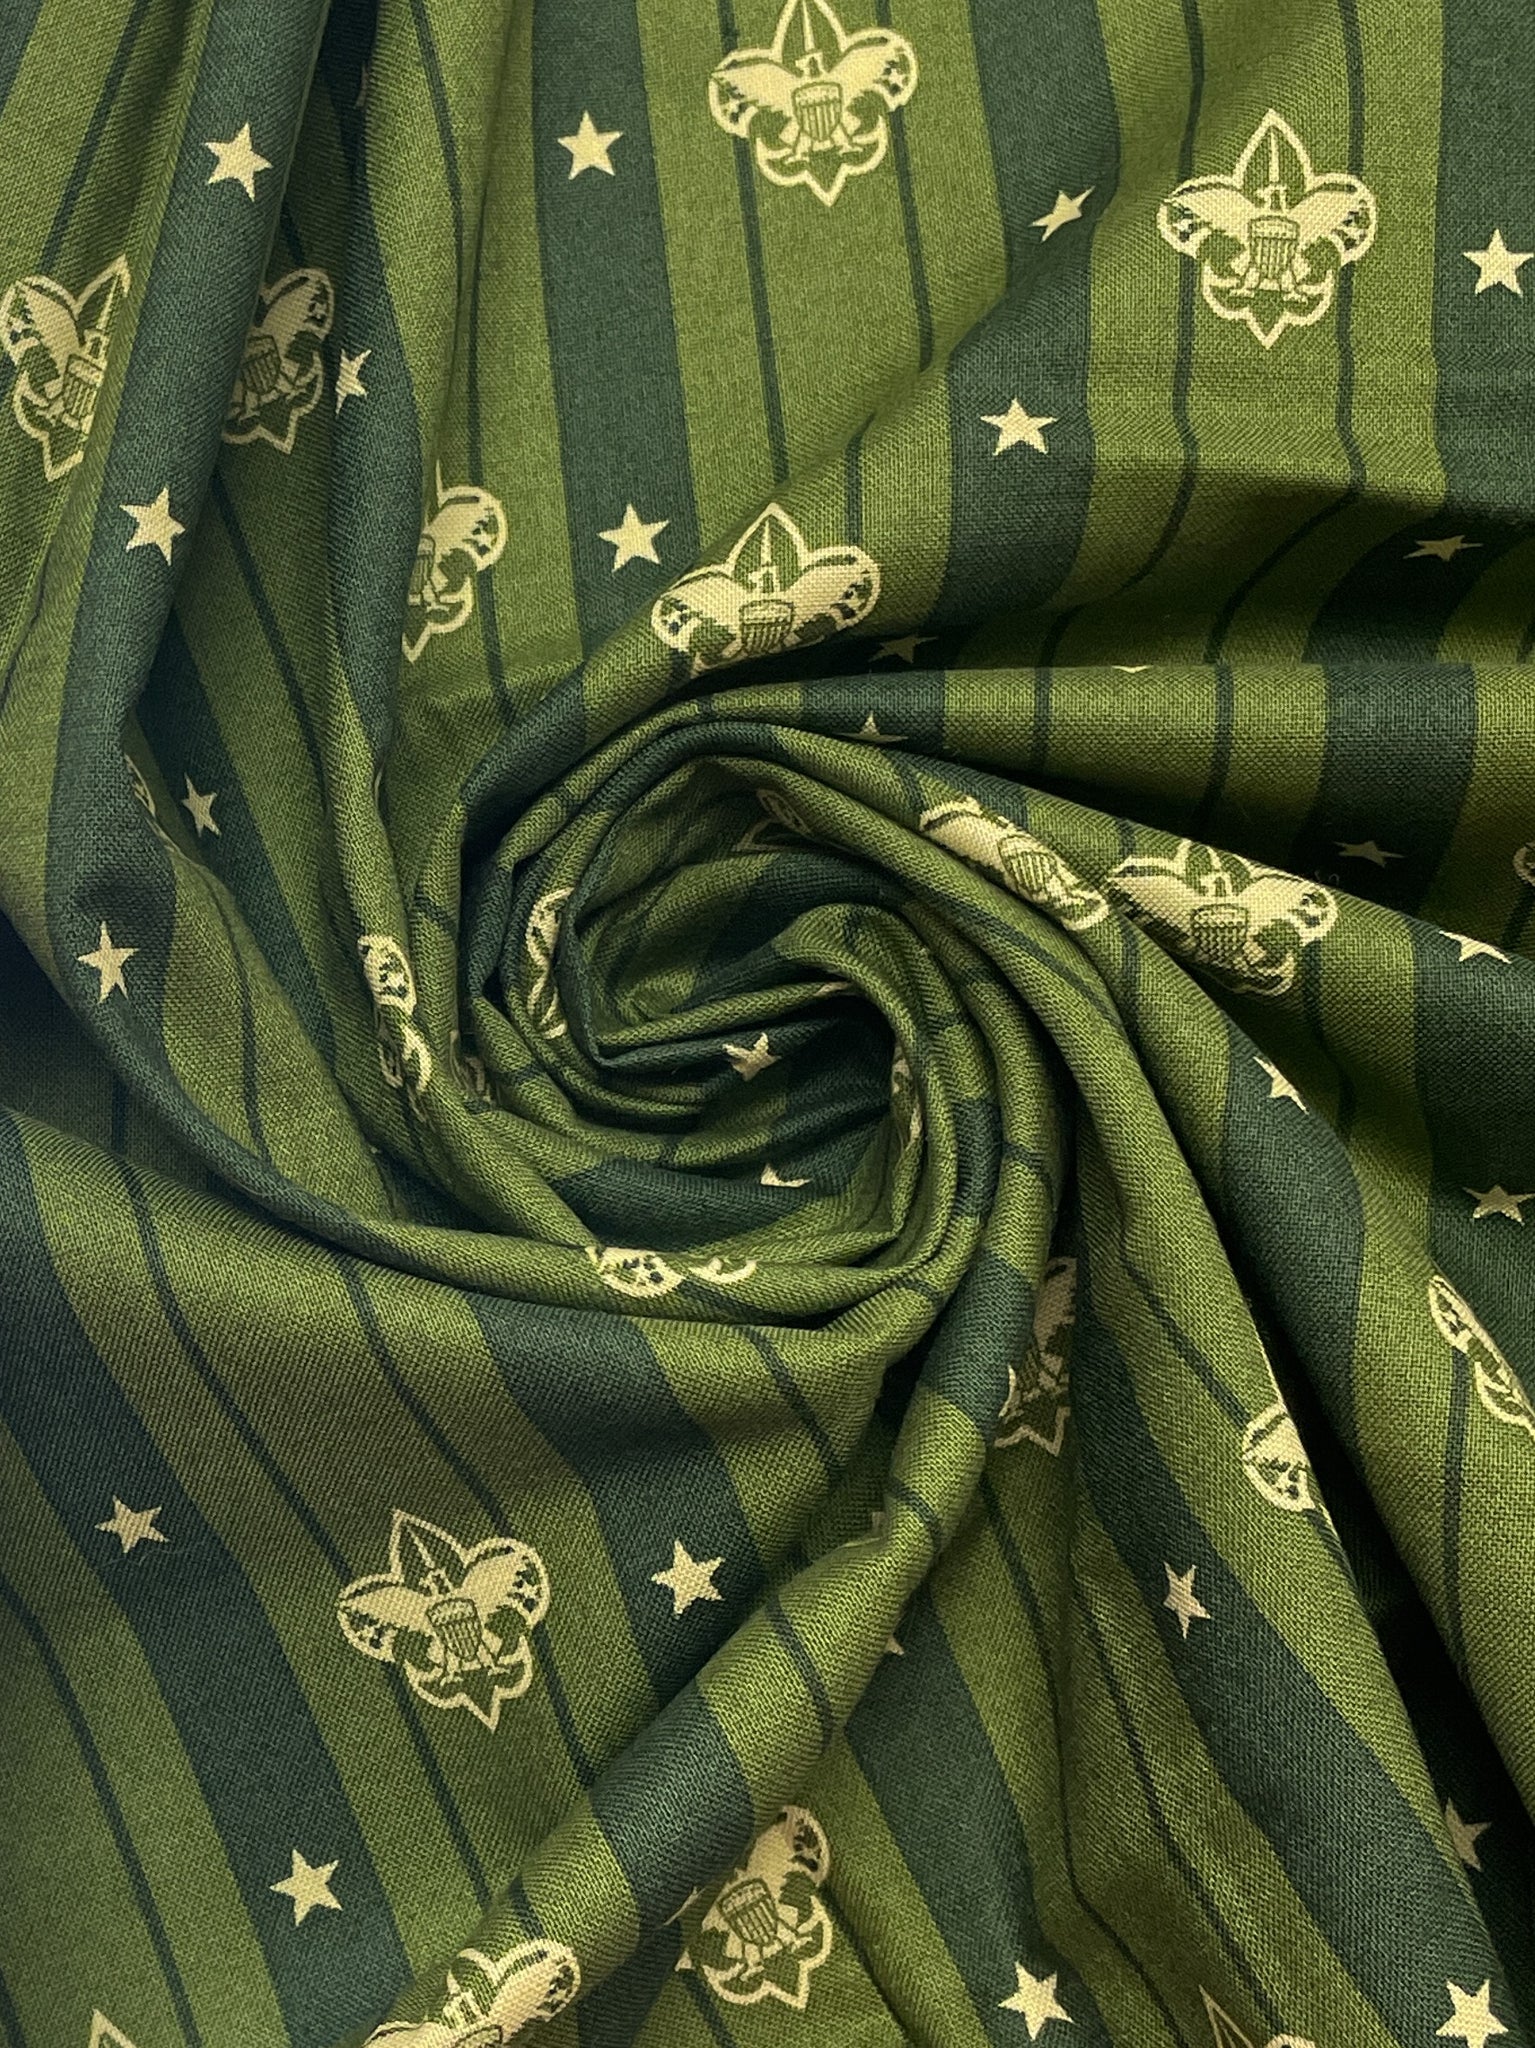 5/8 YD Quilting Cotton Remnant - Olive Green and Dark Green Stripes with Ecru Scout Boy Insignias and Stars